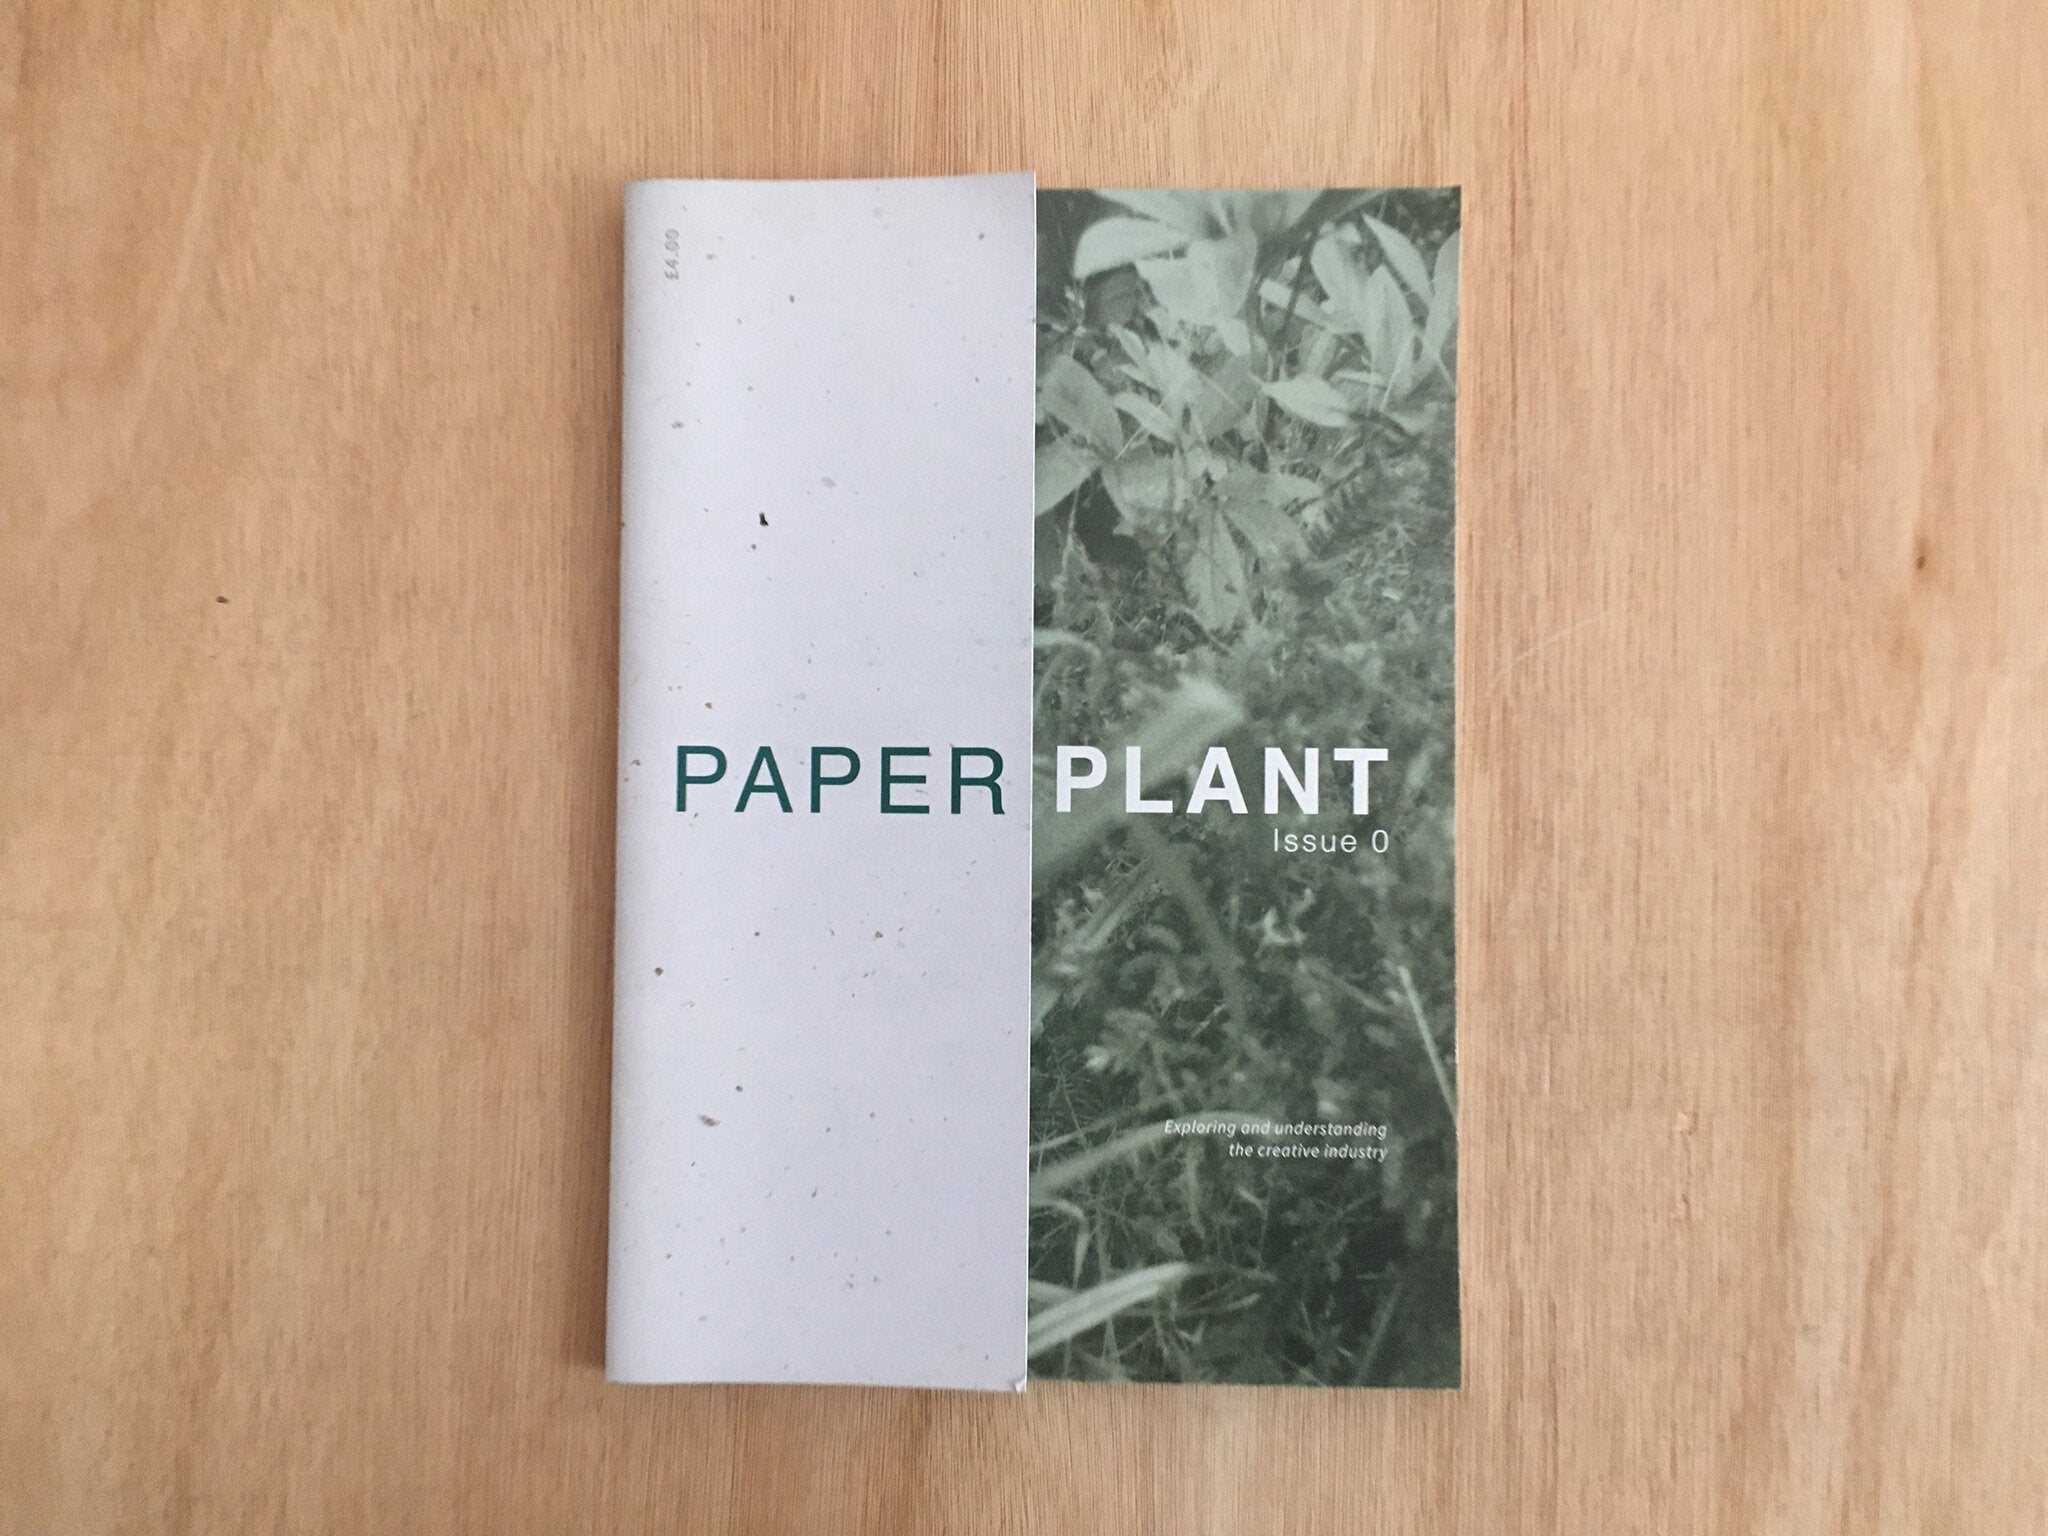 PAPER PLANT ISSUE 0 by Various Artists